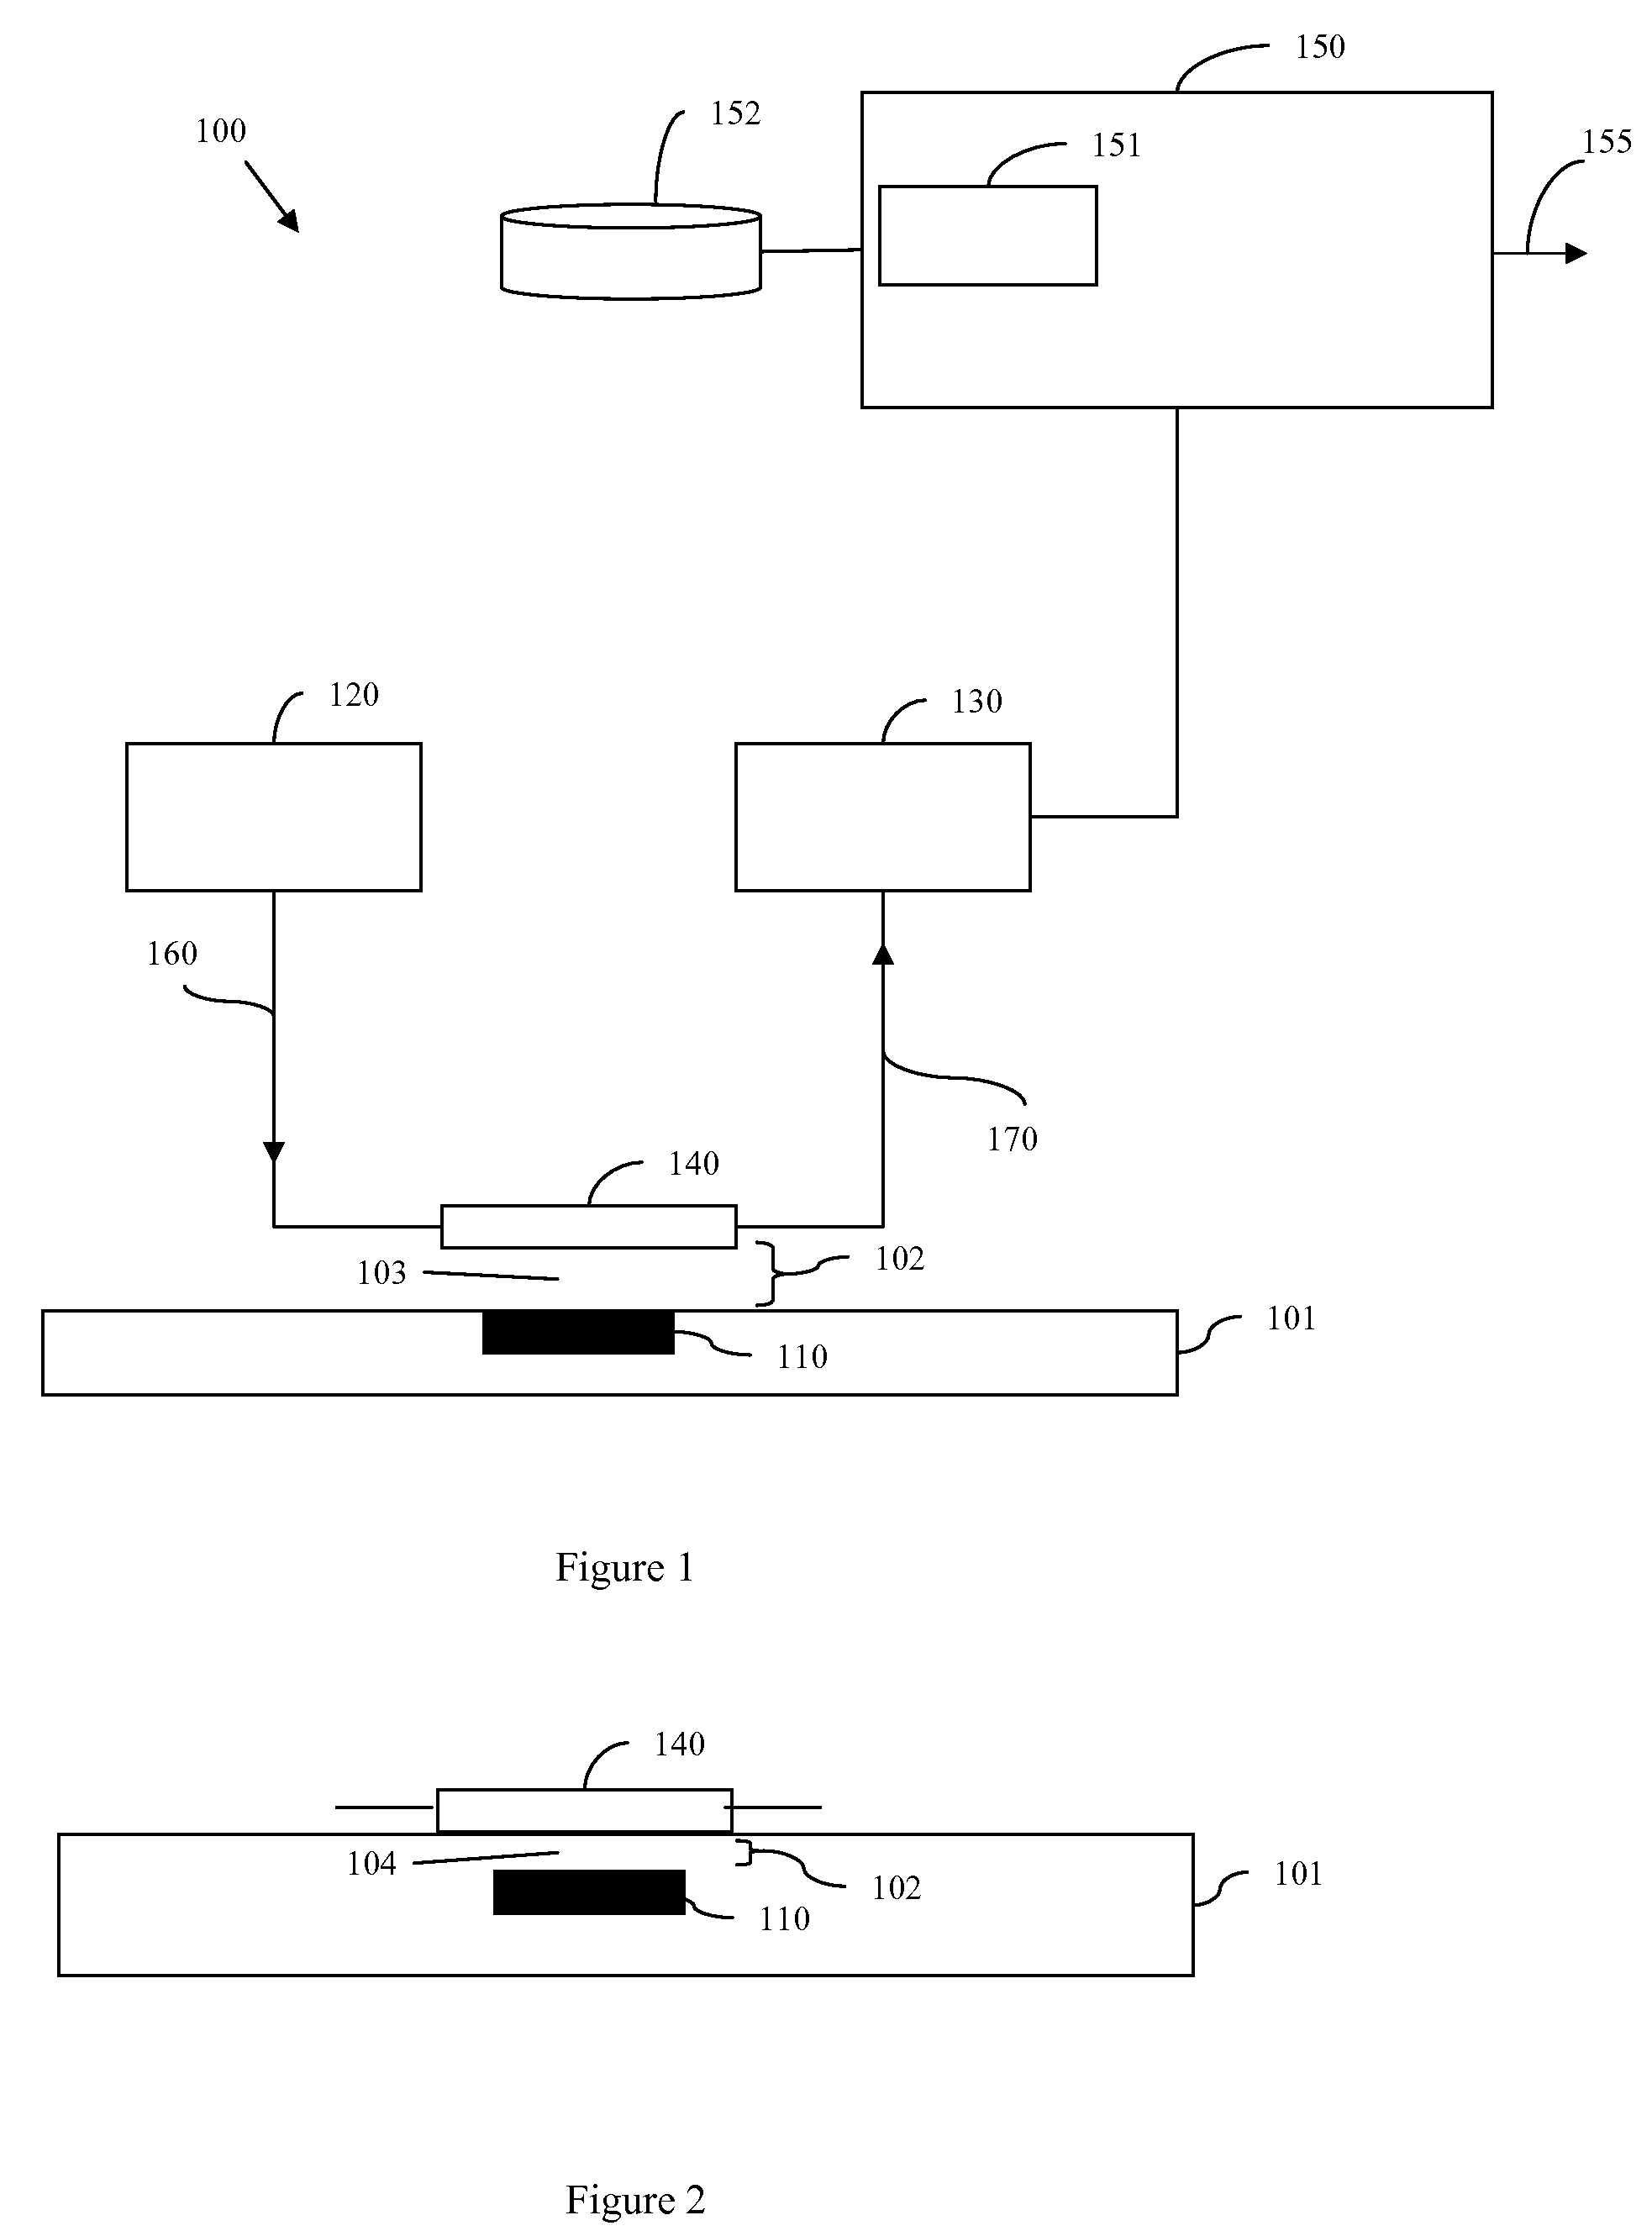 Integrated Circuit Chip Design Flow Methodology Including Insertion of On-Chip or Scribe Line Wireless Process Monitoring and Feedback Circuitry